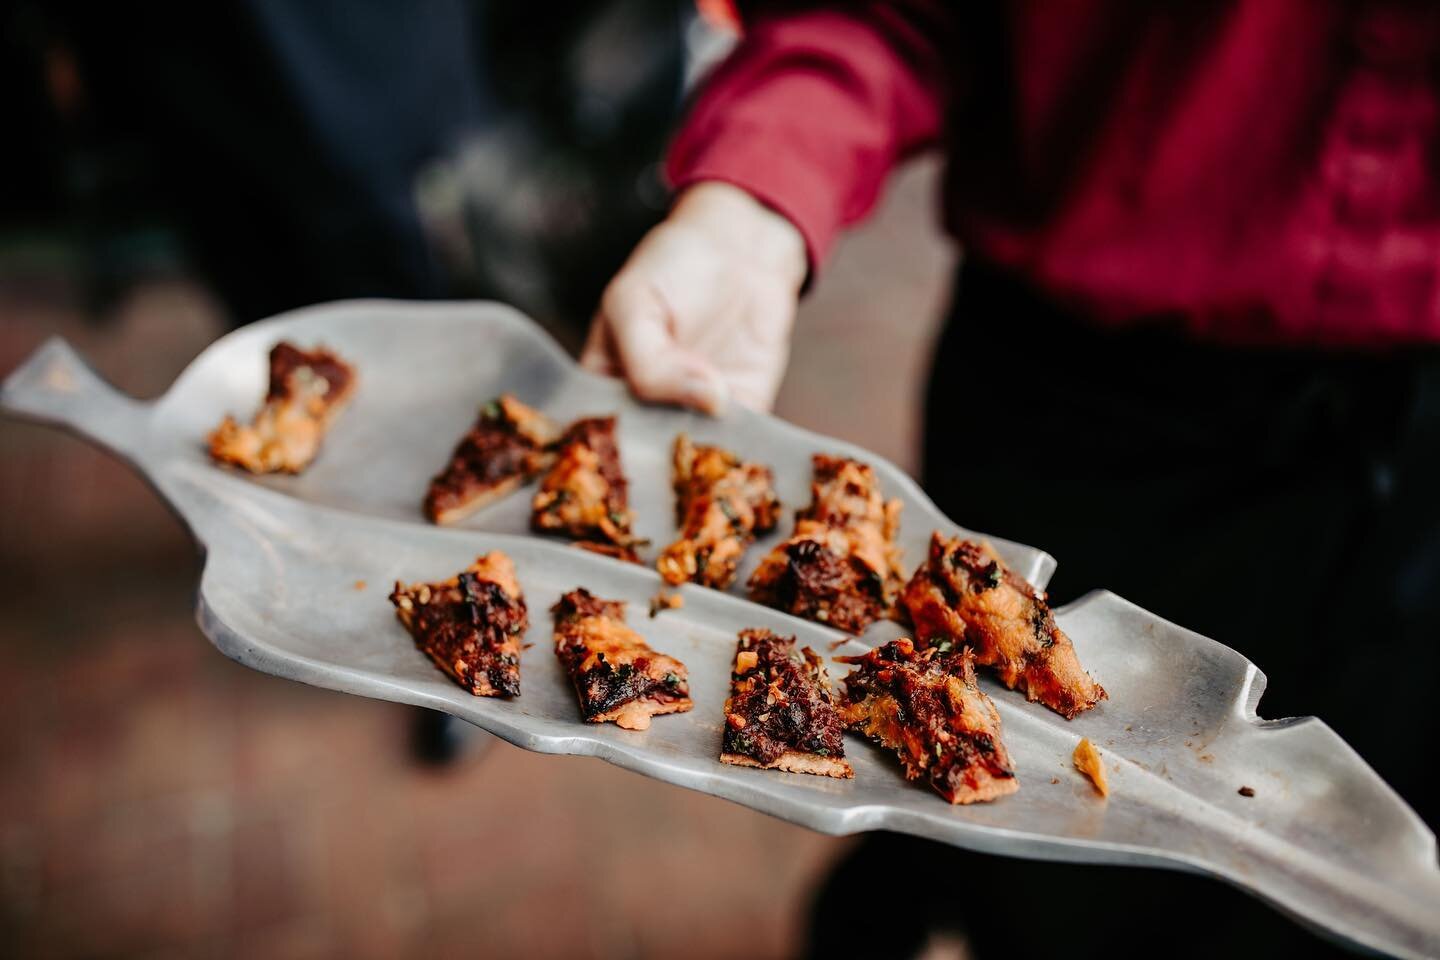 BBQ Brisket Flatbread is a crowd-favorite passed hors d&rsquo;oeuvre - a superb bite with quintessential KC flavor 🤌
photo | @amberkoellingphotography 
#kcbbq #kcweddings #catering #weddingbites #appetizers